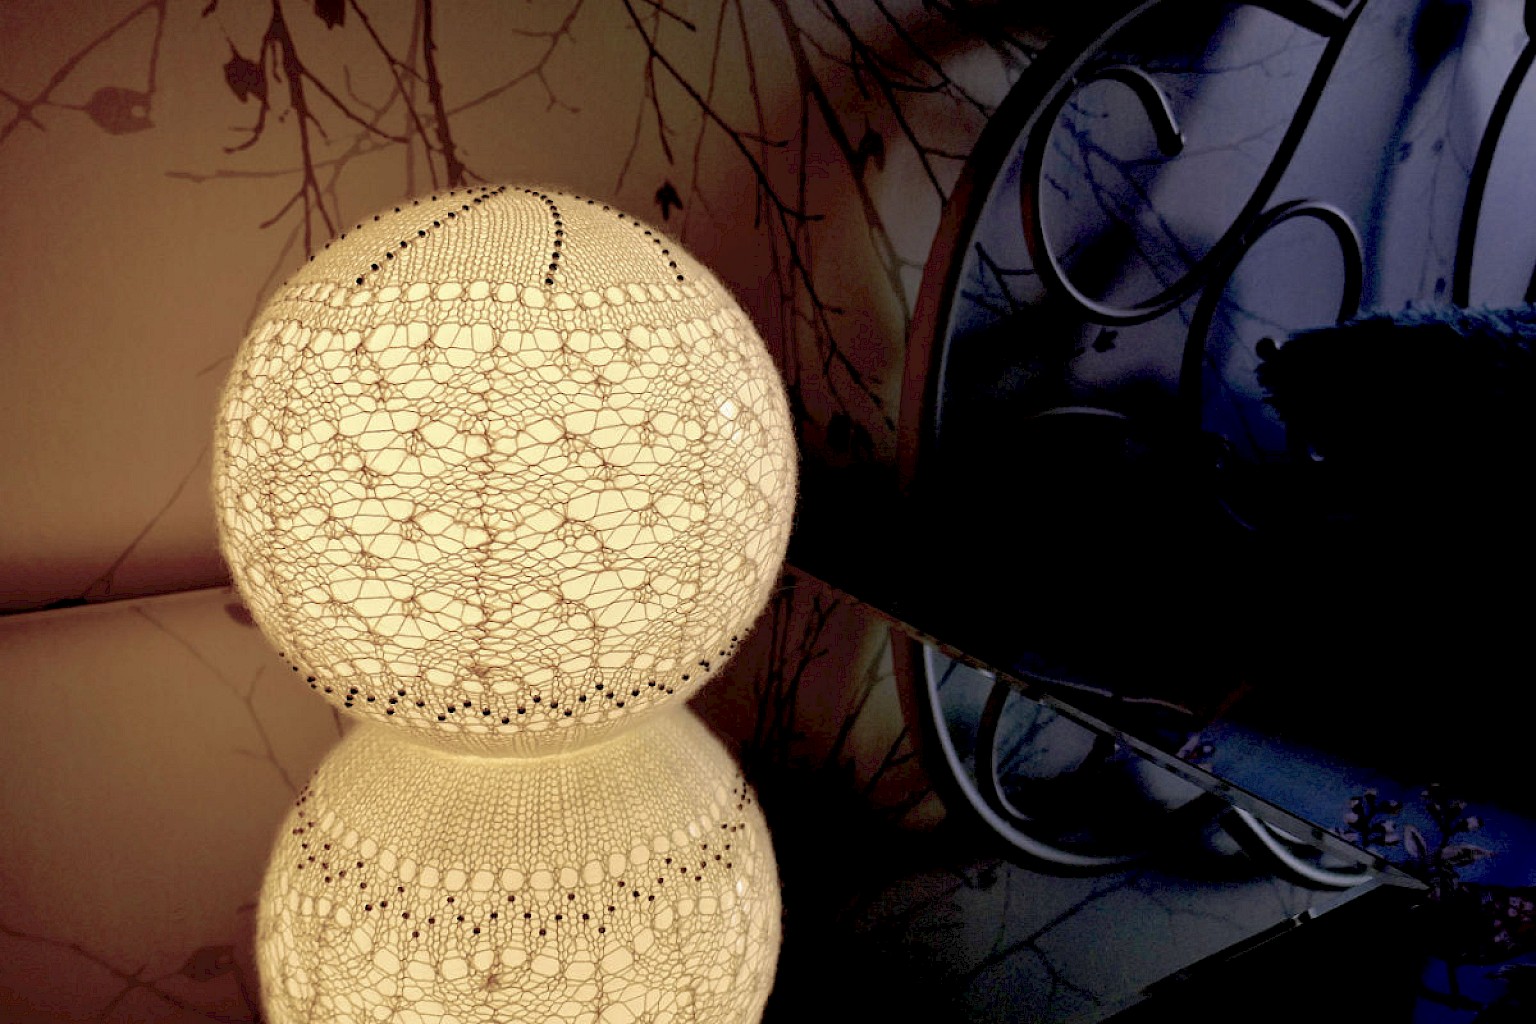 Shetland fine Lace wool contemporary table lamps. 115.00 pounds each. - Image